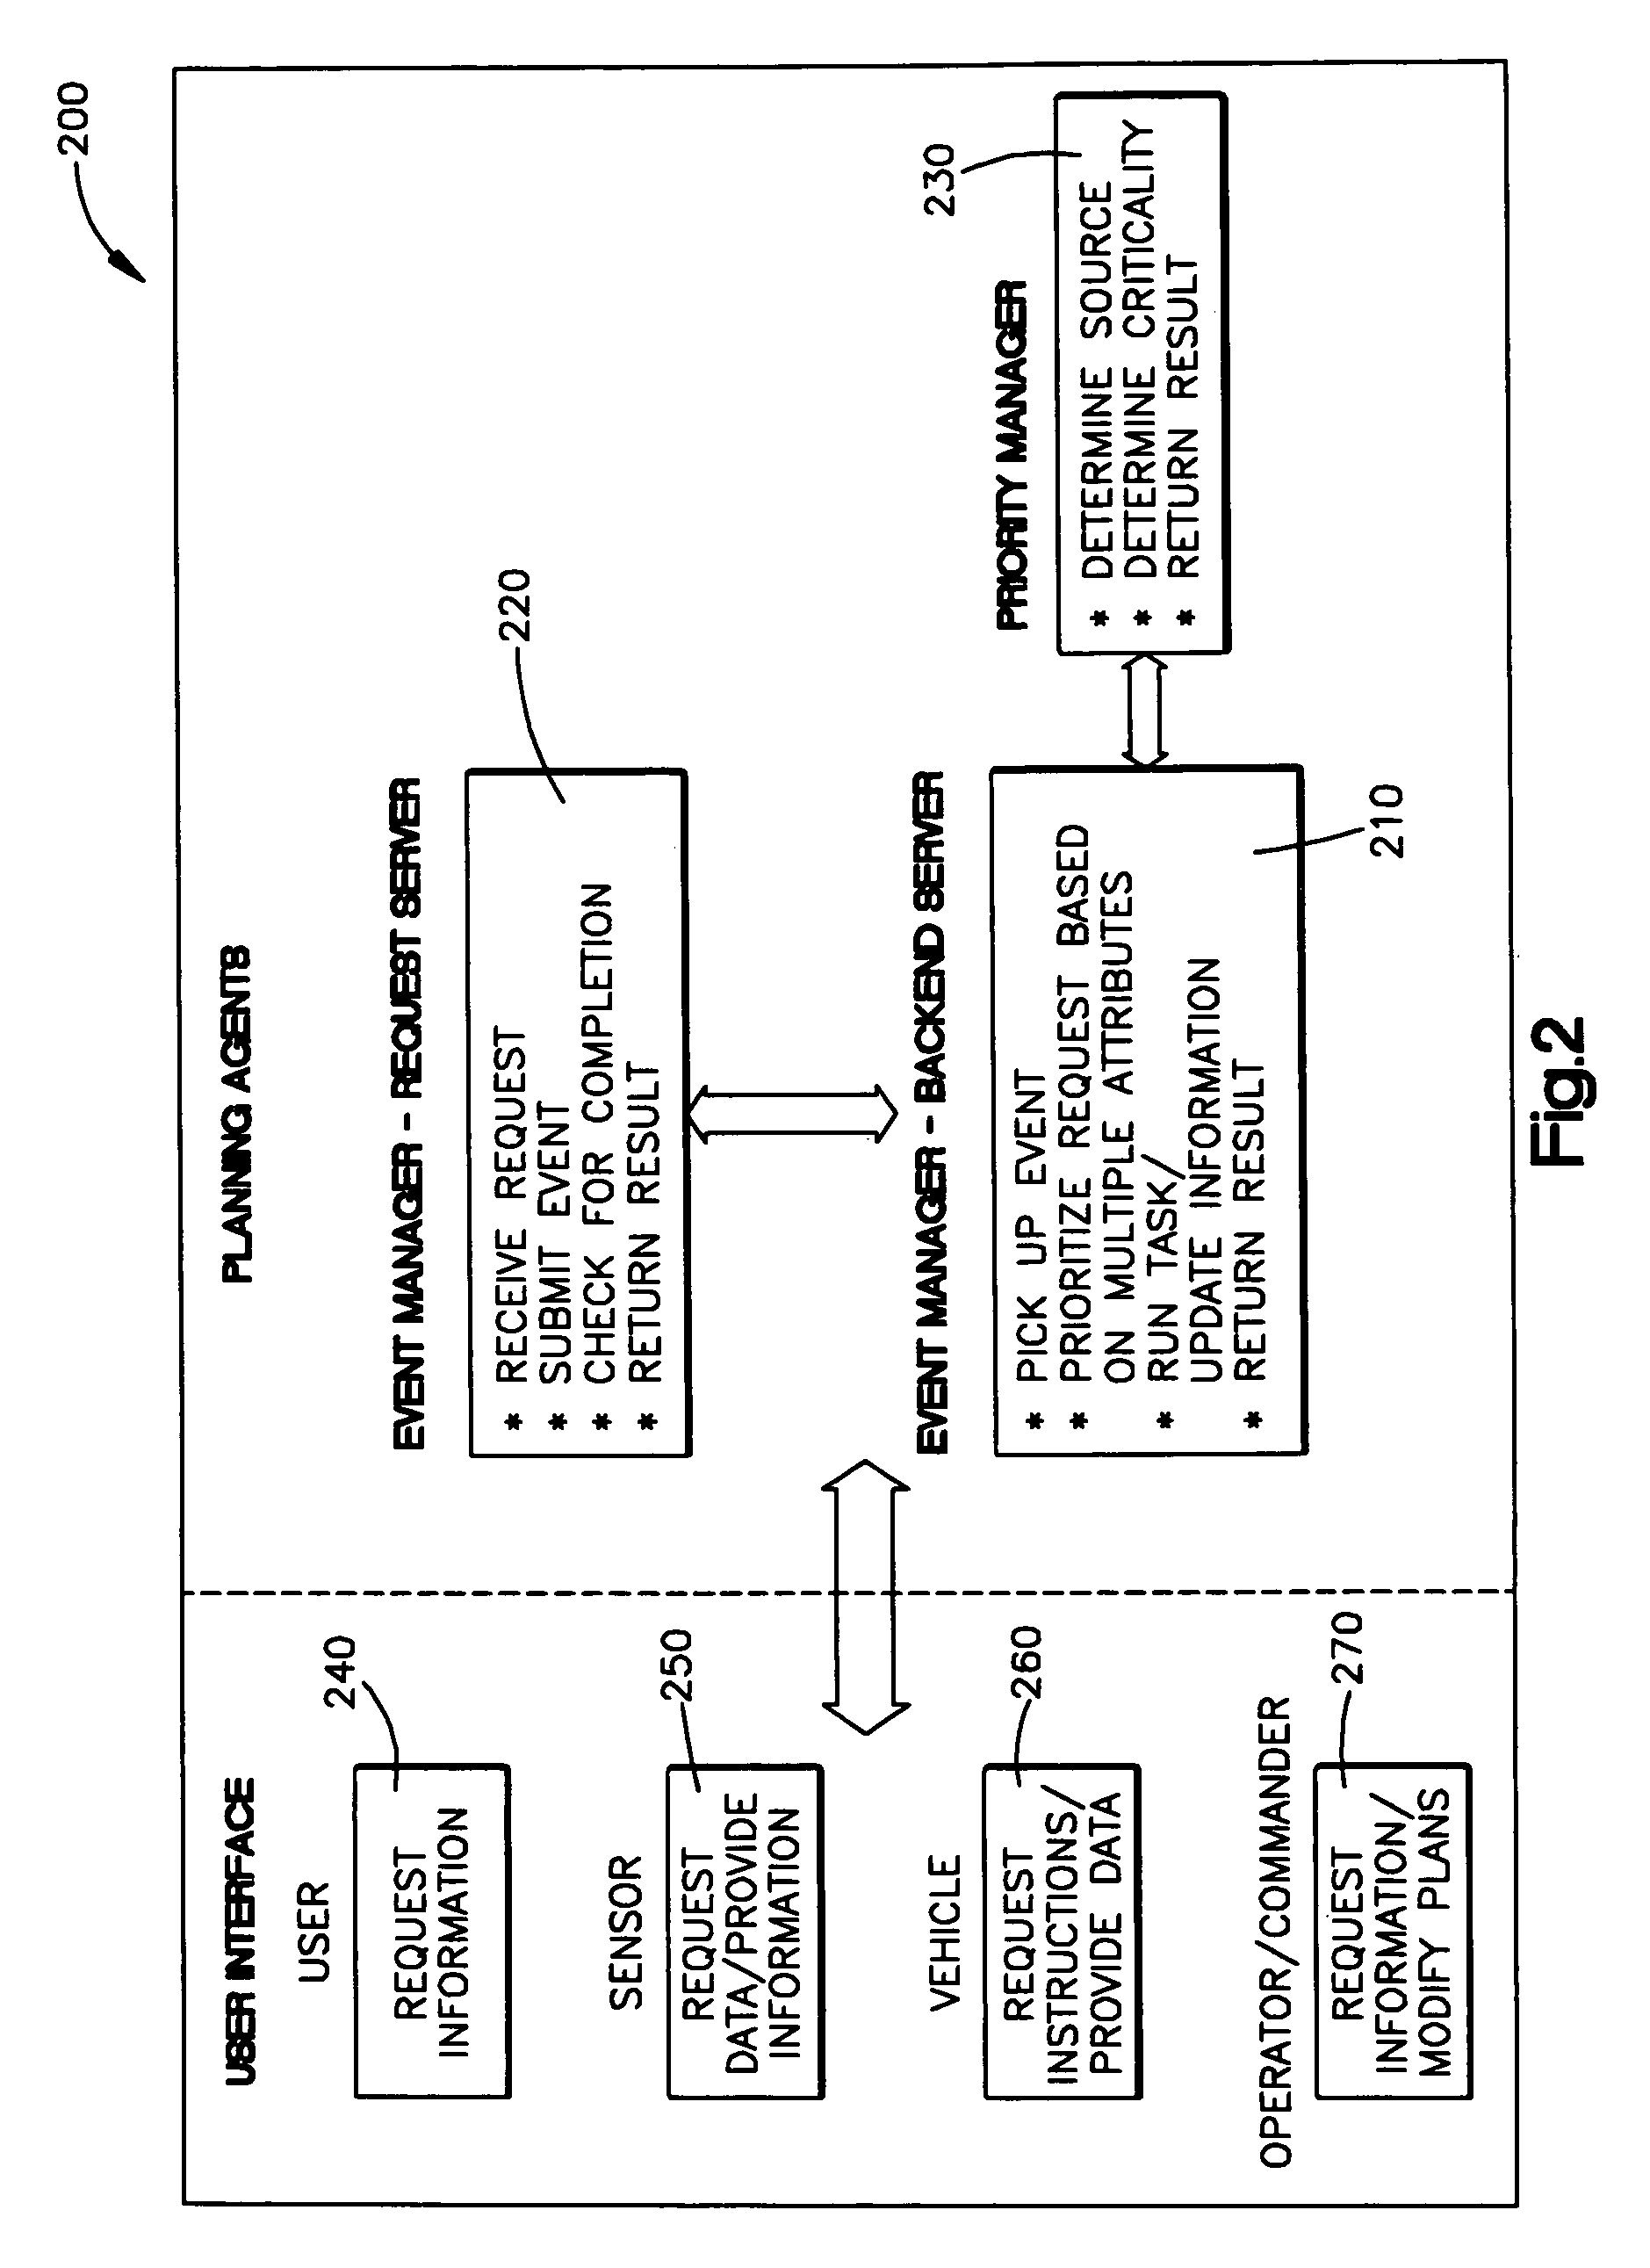 Mission planning system with asynchronous request capability